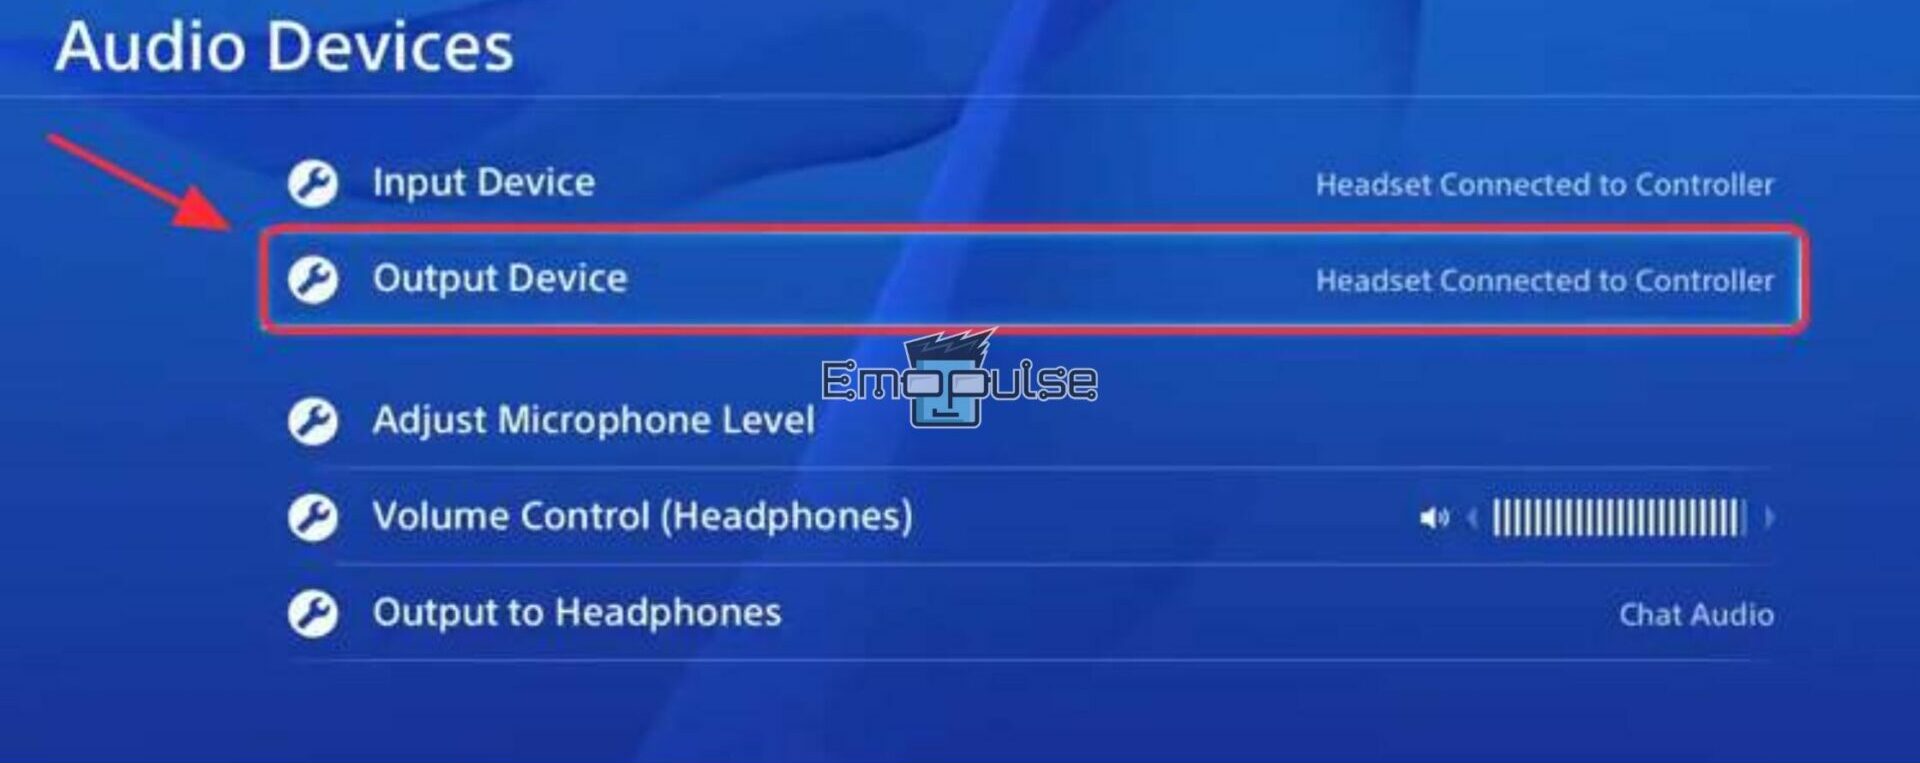 Audio Devices Settings in PlayStation how to connect unsupported bluetooth to ps4